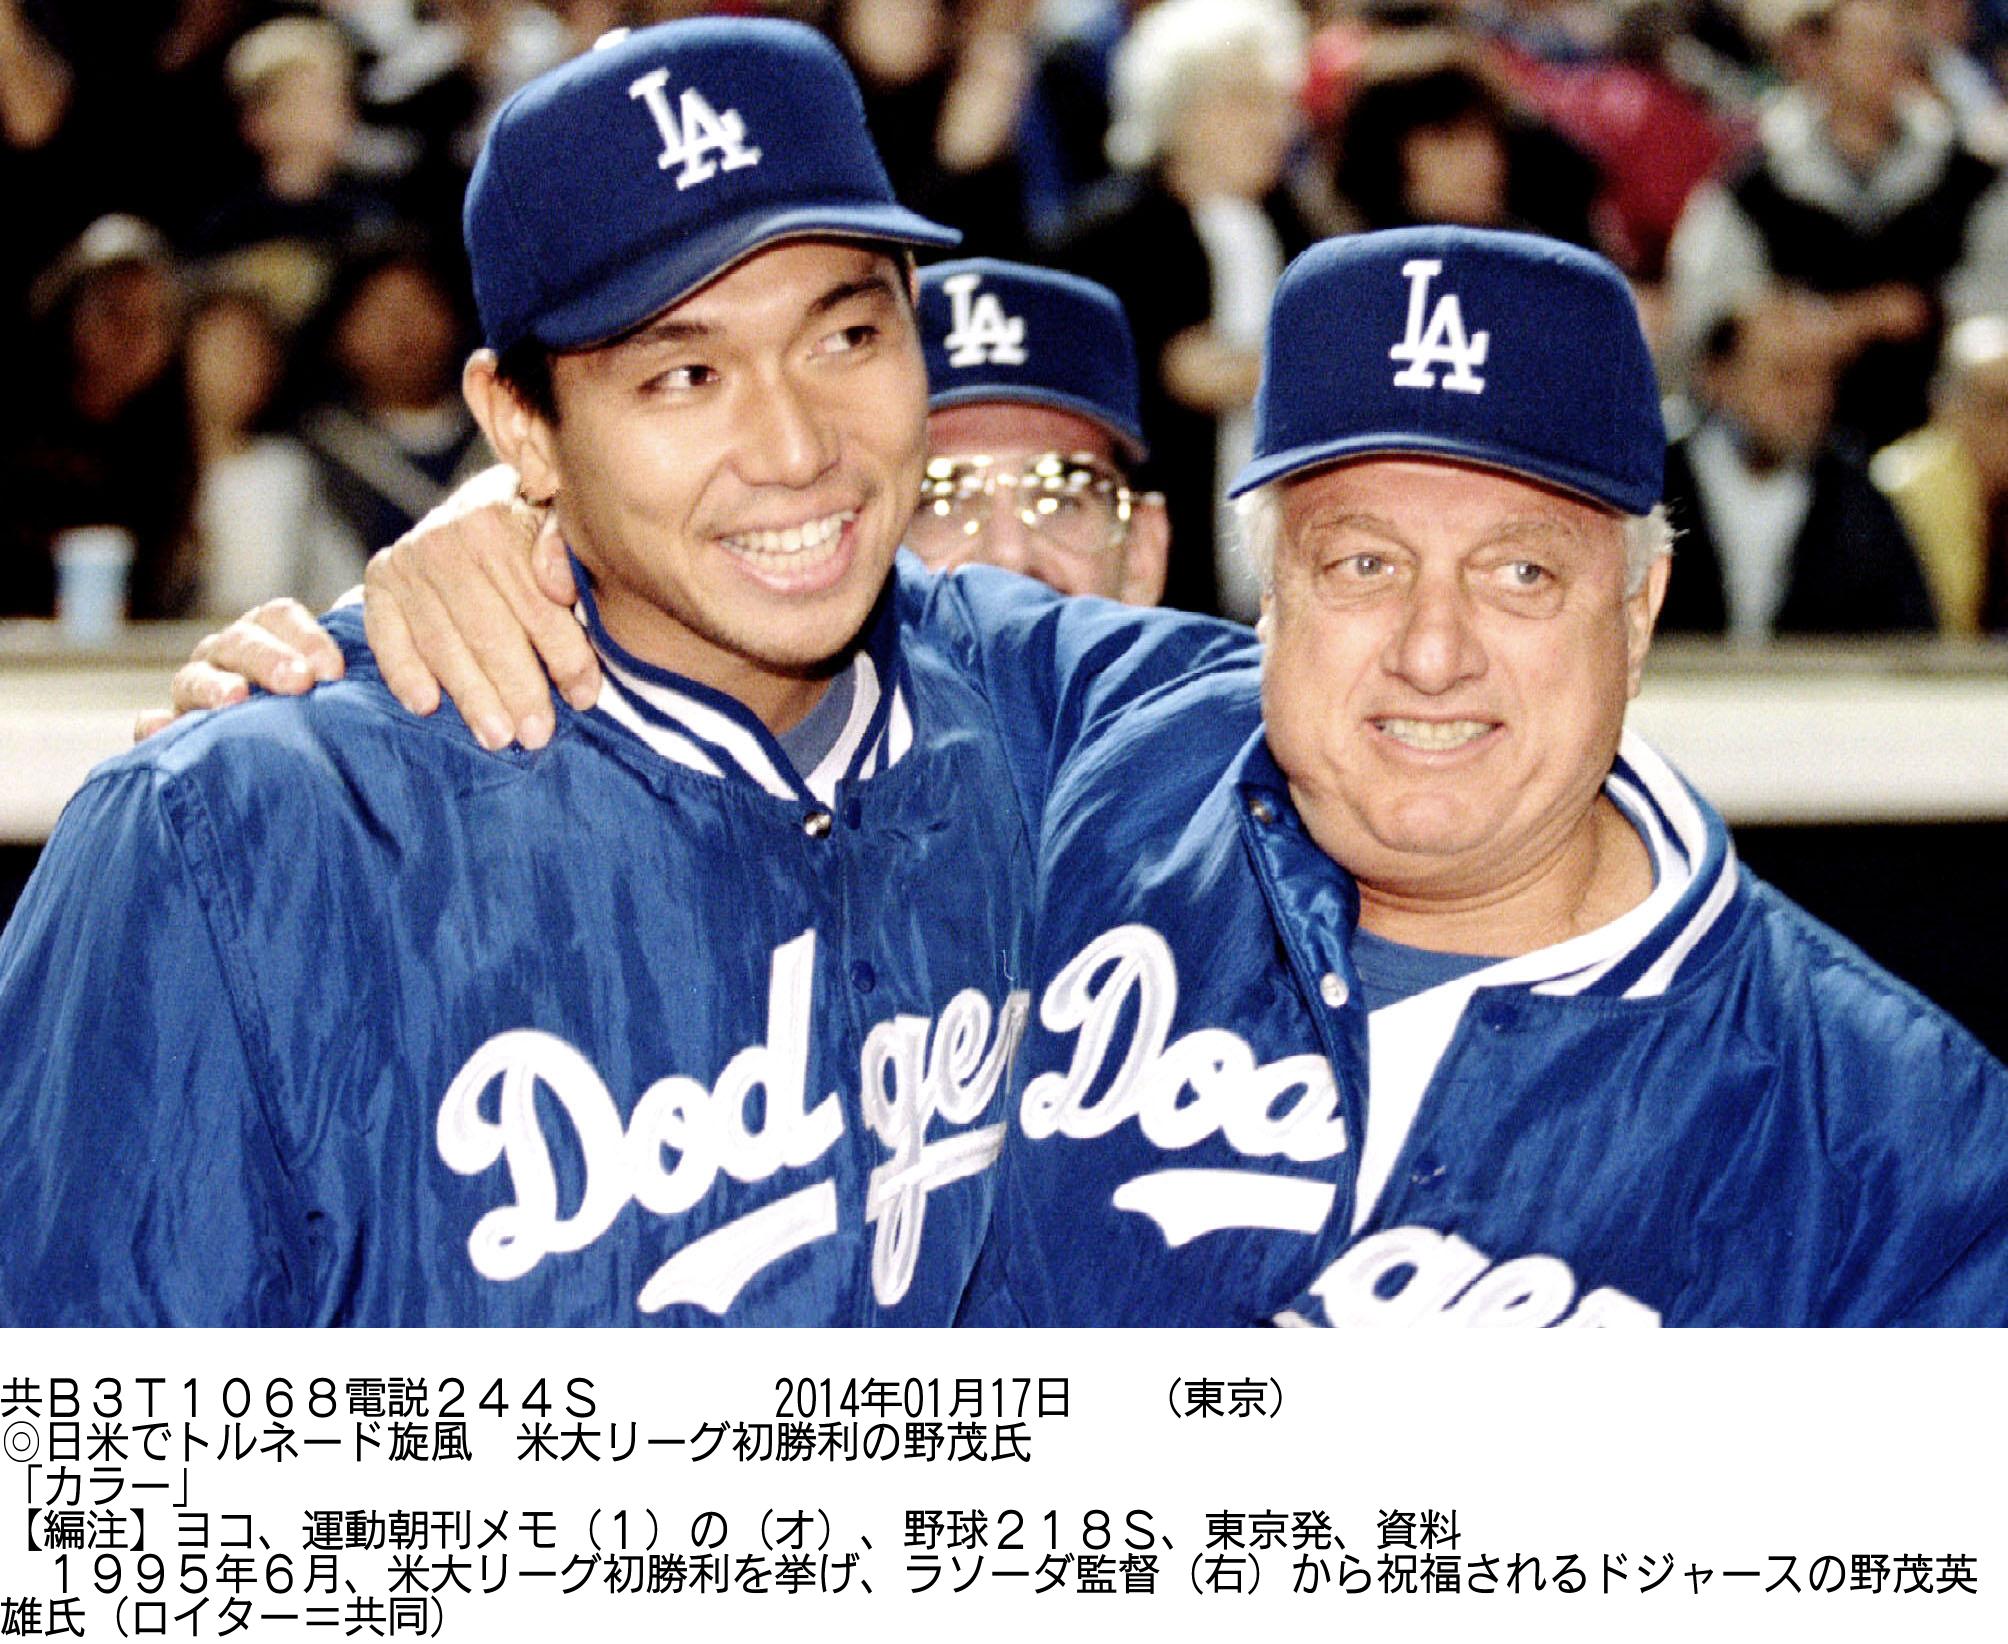 A star is born: Hideo Nomo celebrates with Los Angeles Dodgers manager Tommy Lasorda after picking up his first win in the major leagues against the New York Mets in June 1995. | KYODO